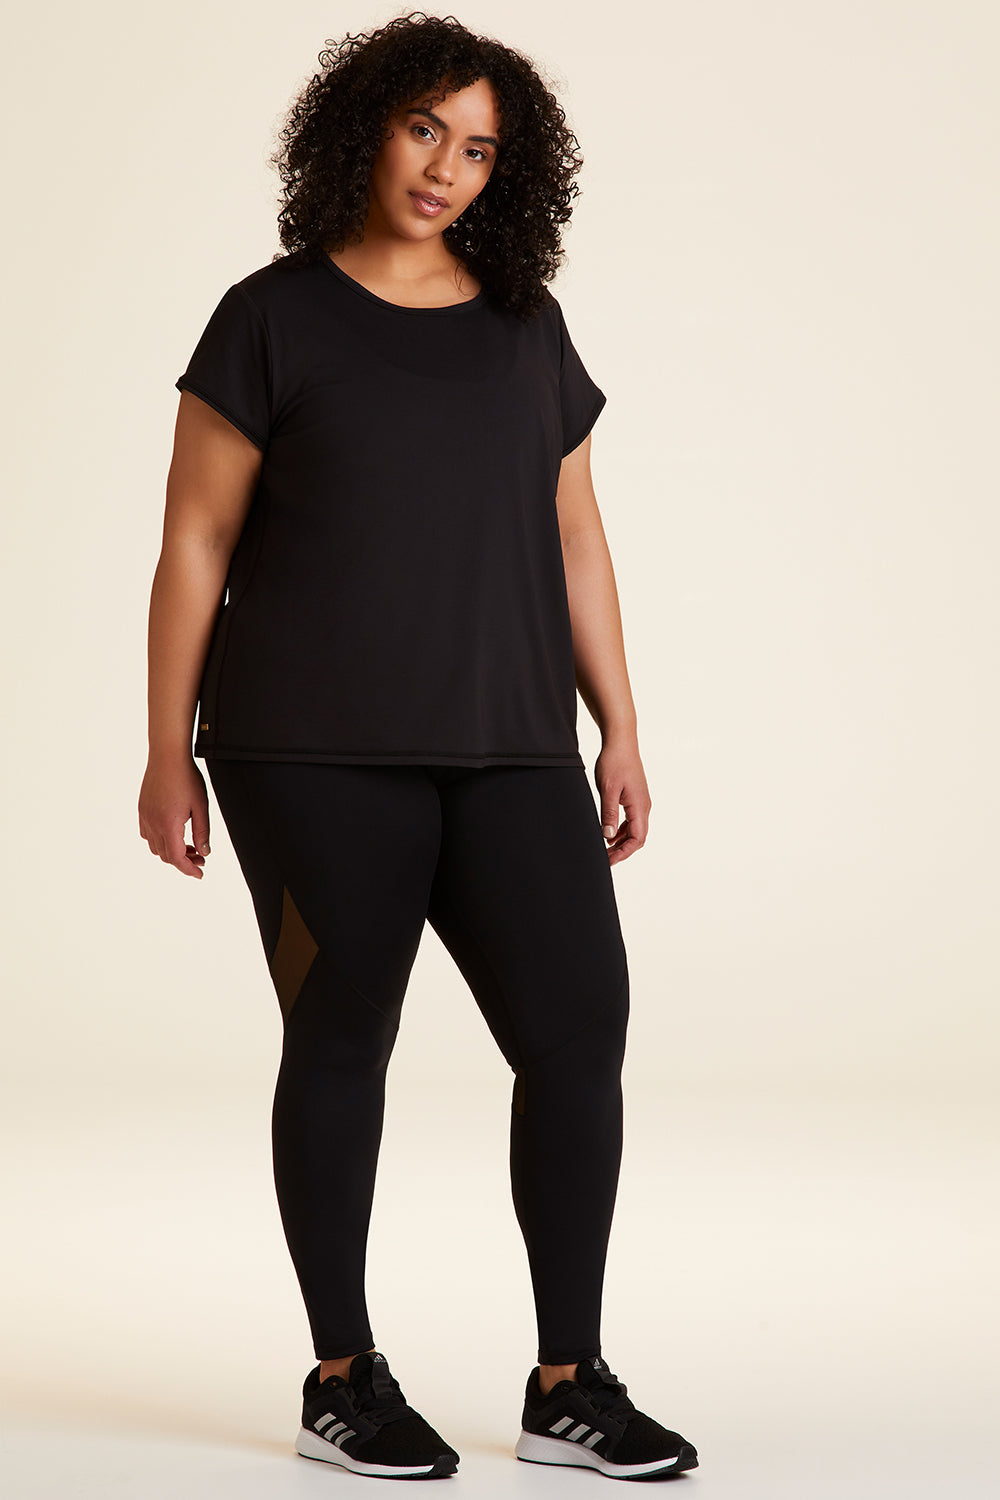 Full body front view of Alala Women's Luxury Athleisure blade tee in black